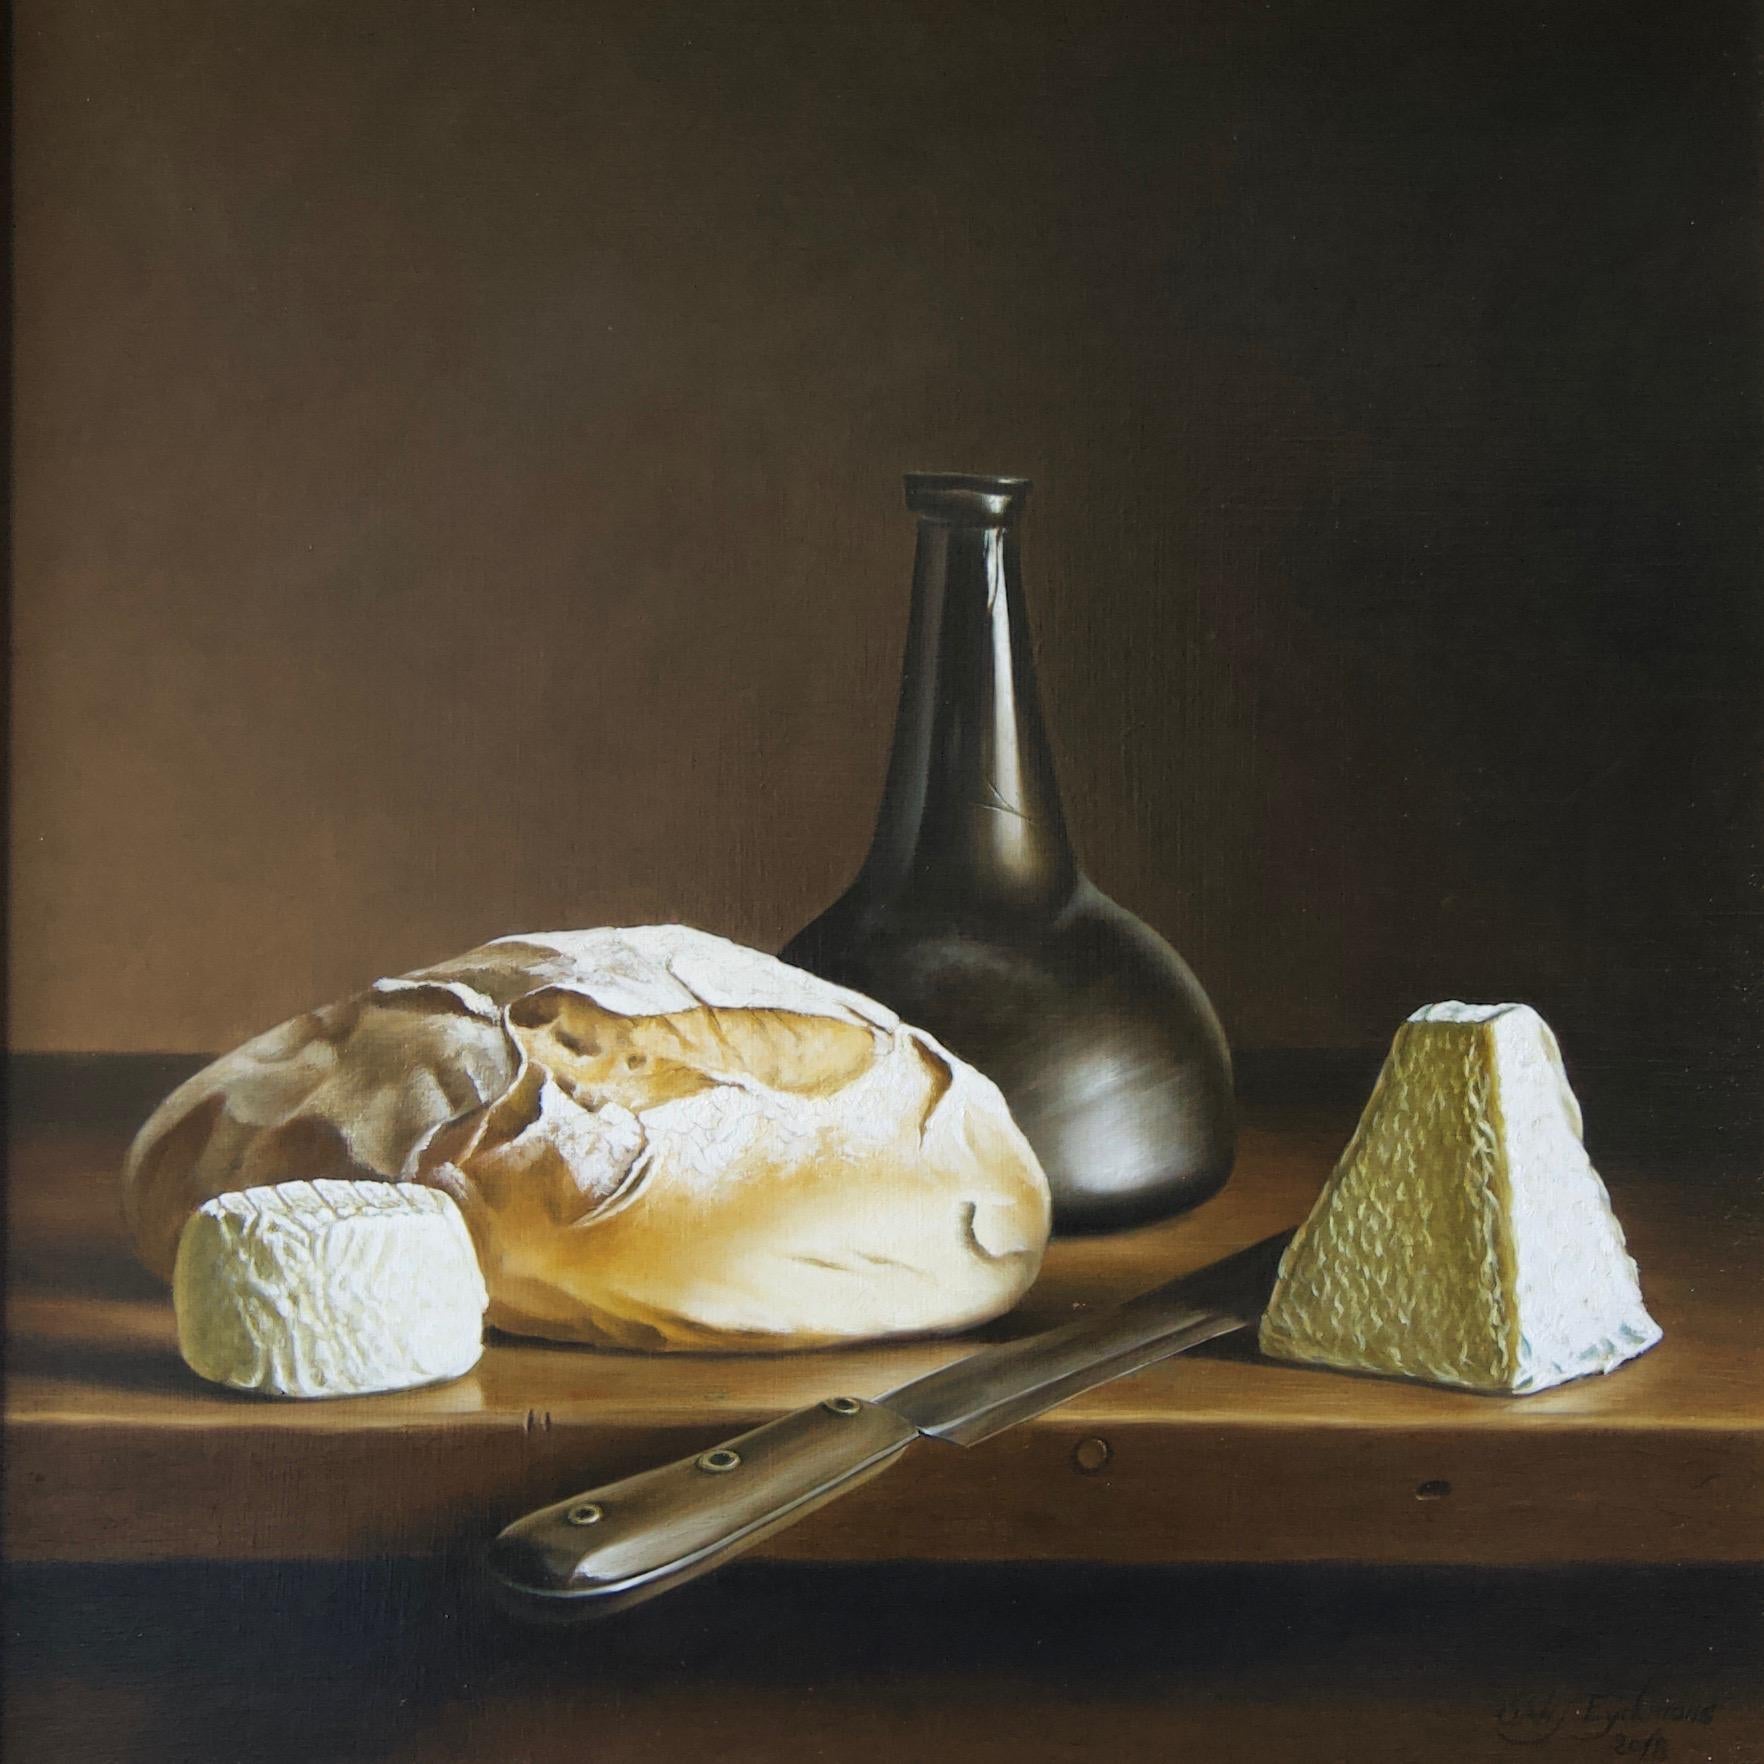 Bread and French Goat Cheese - Painting by Stefaan Eyckmans